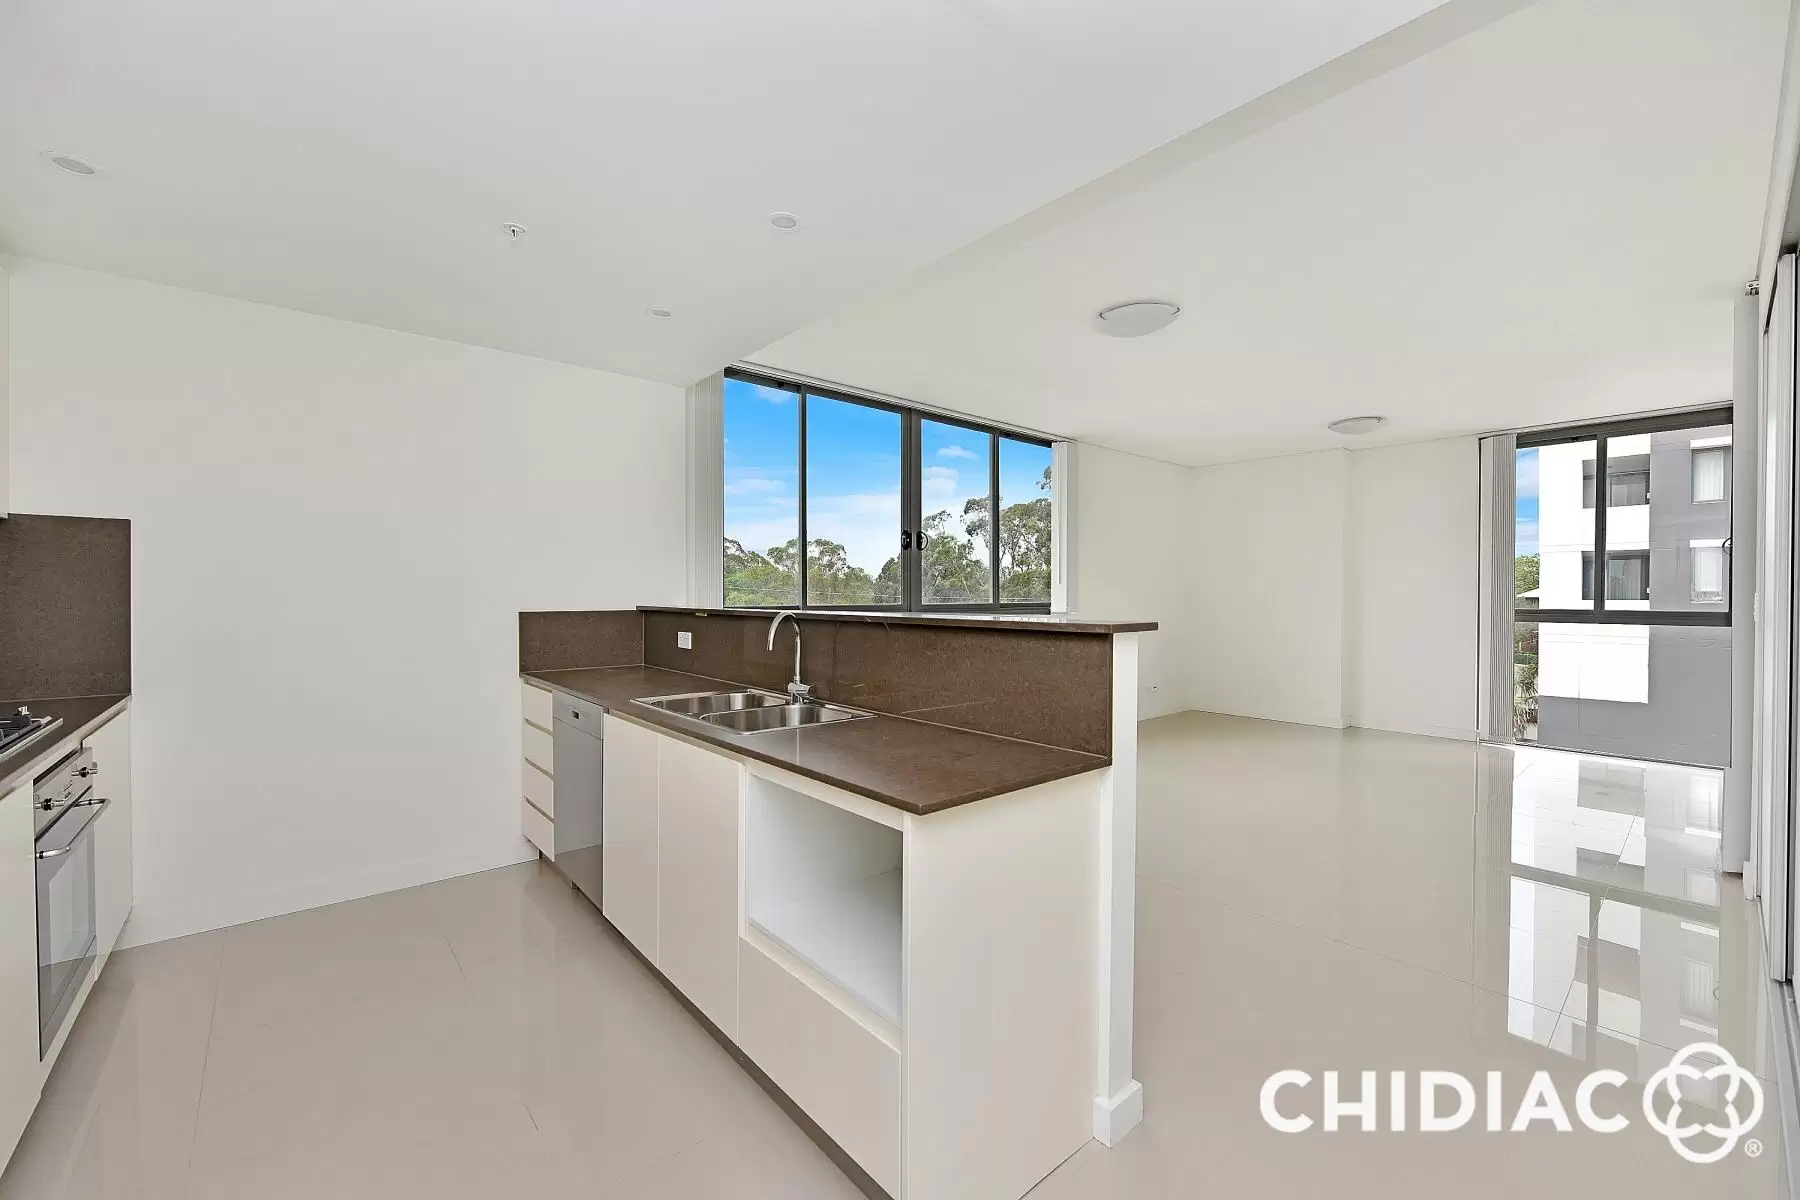 201/6 River Road West, Parramatta Leased by Chidiac Realty - image 2